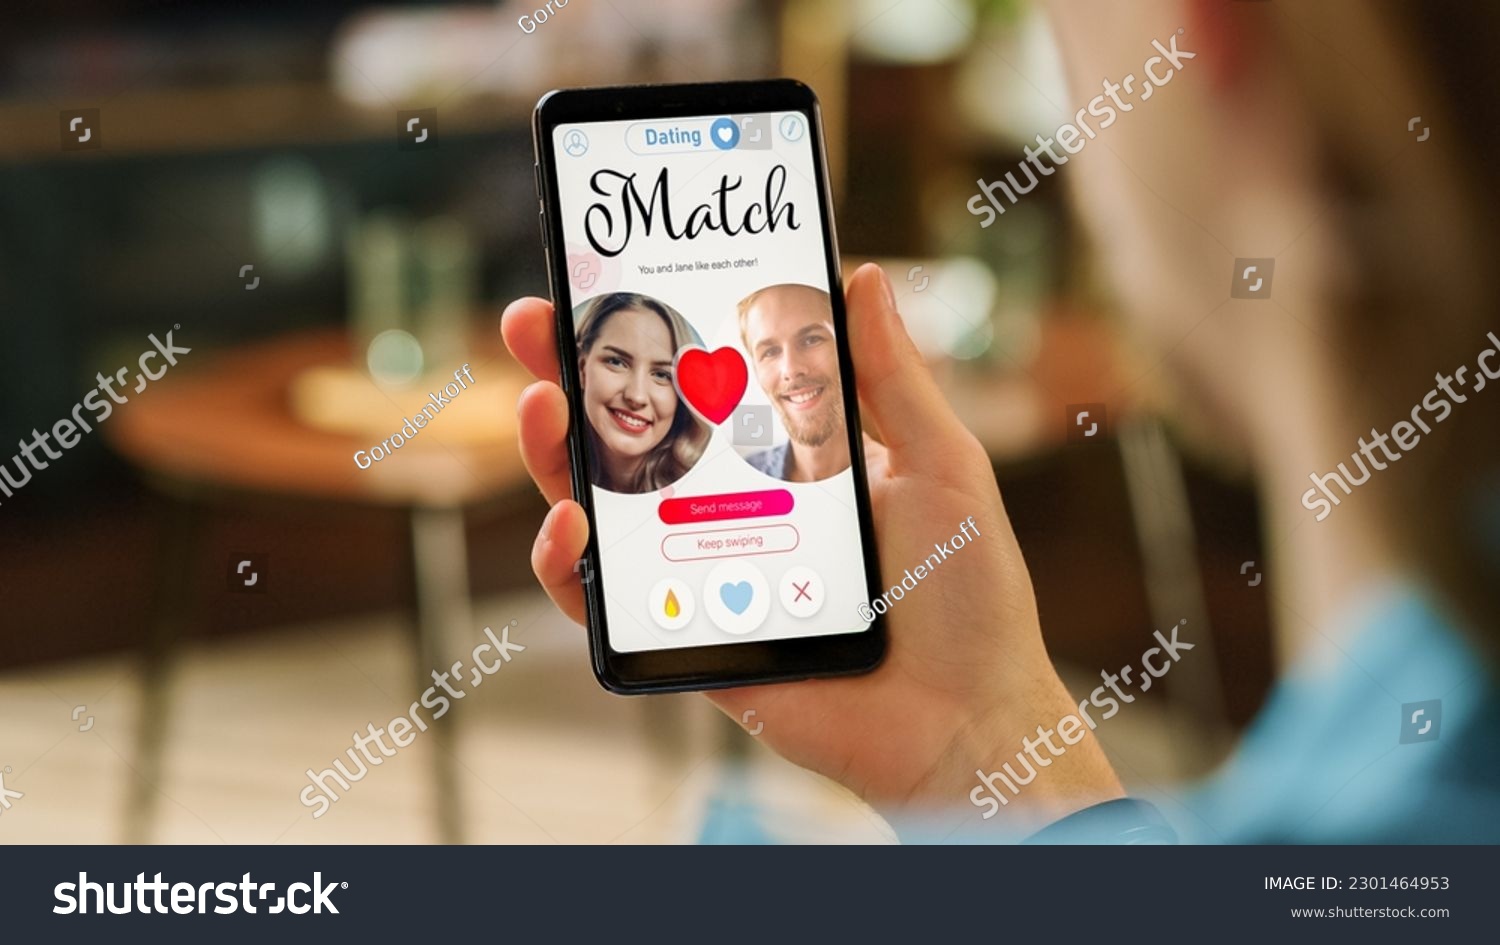 POV Dating App Concept: Person Uses Smartphone for Browsing Social Media Dating Application. Person Swiping, Searching, Screen Shows Matching with Partner, Finding True Love #2301464953